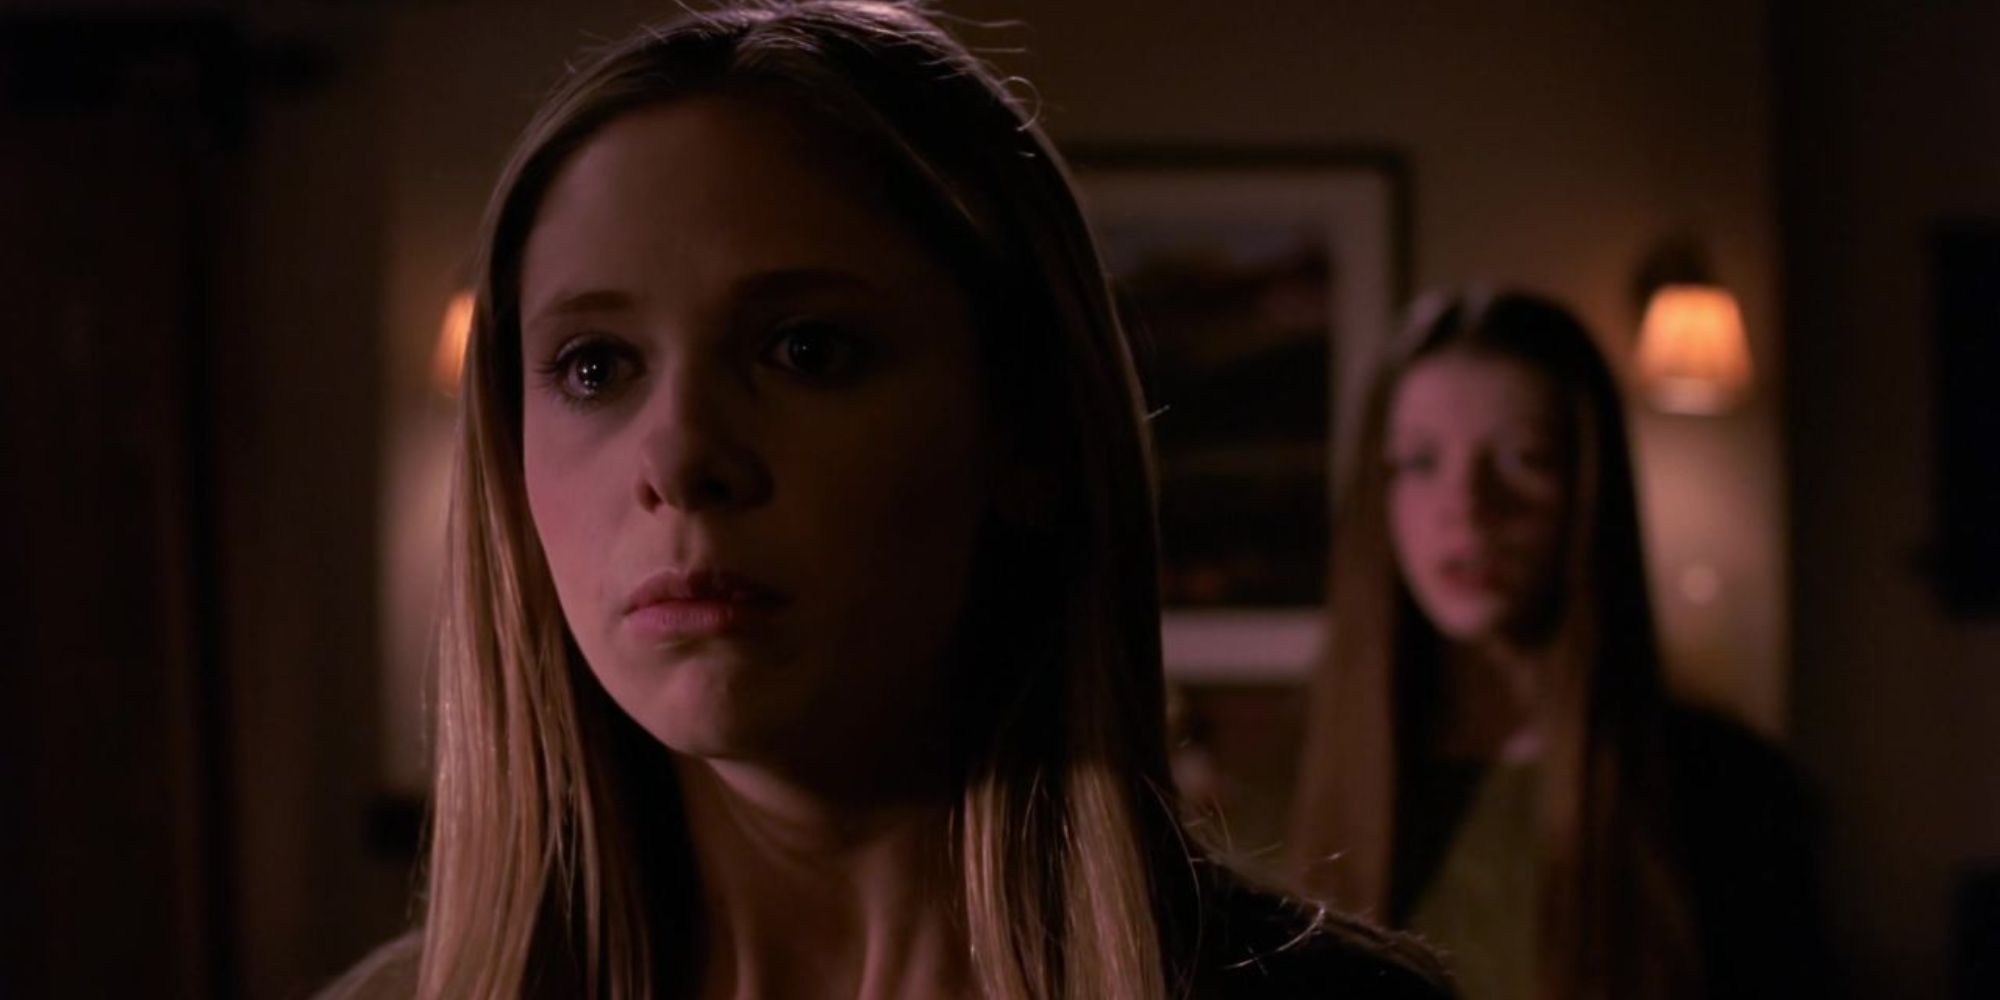 Buffy and Dawn having a tearful conversation in Forever